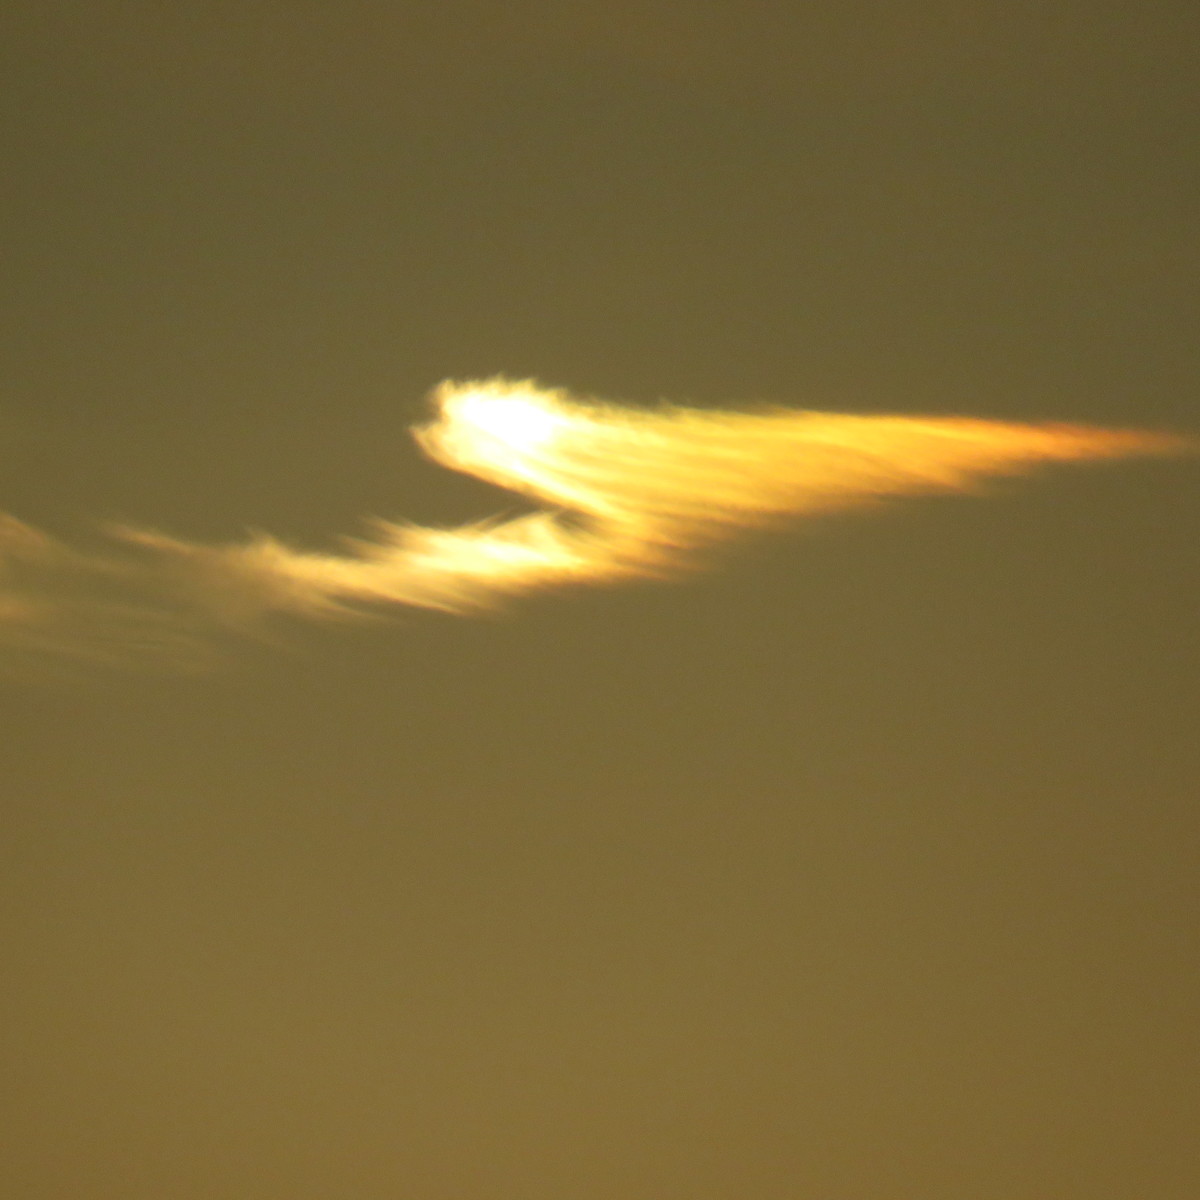 Sun dog from Irlam, 15th May 2019